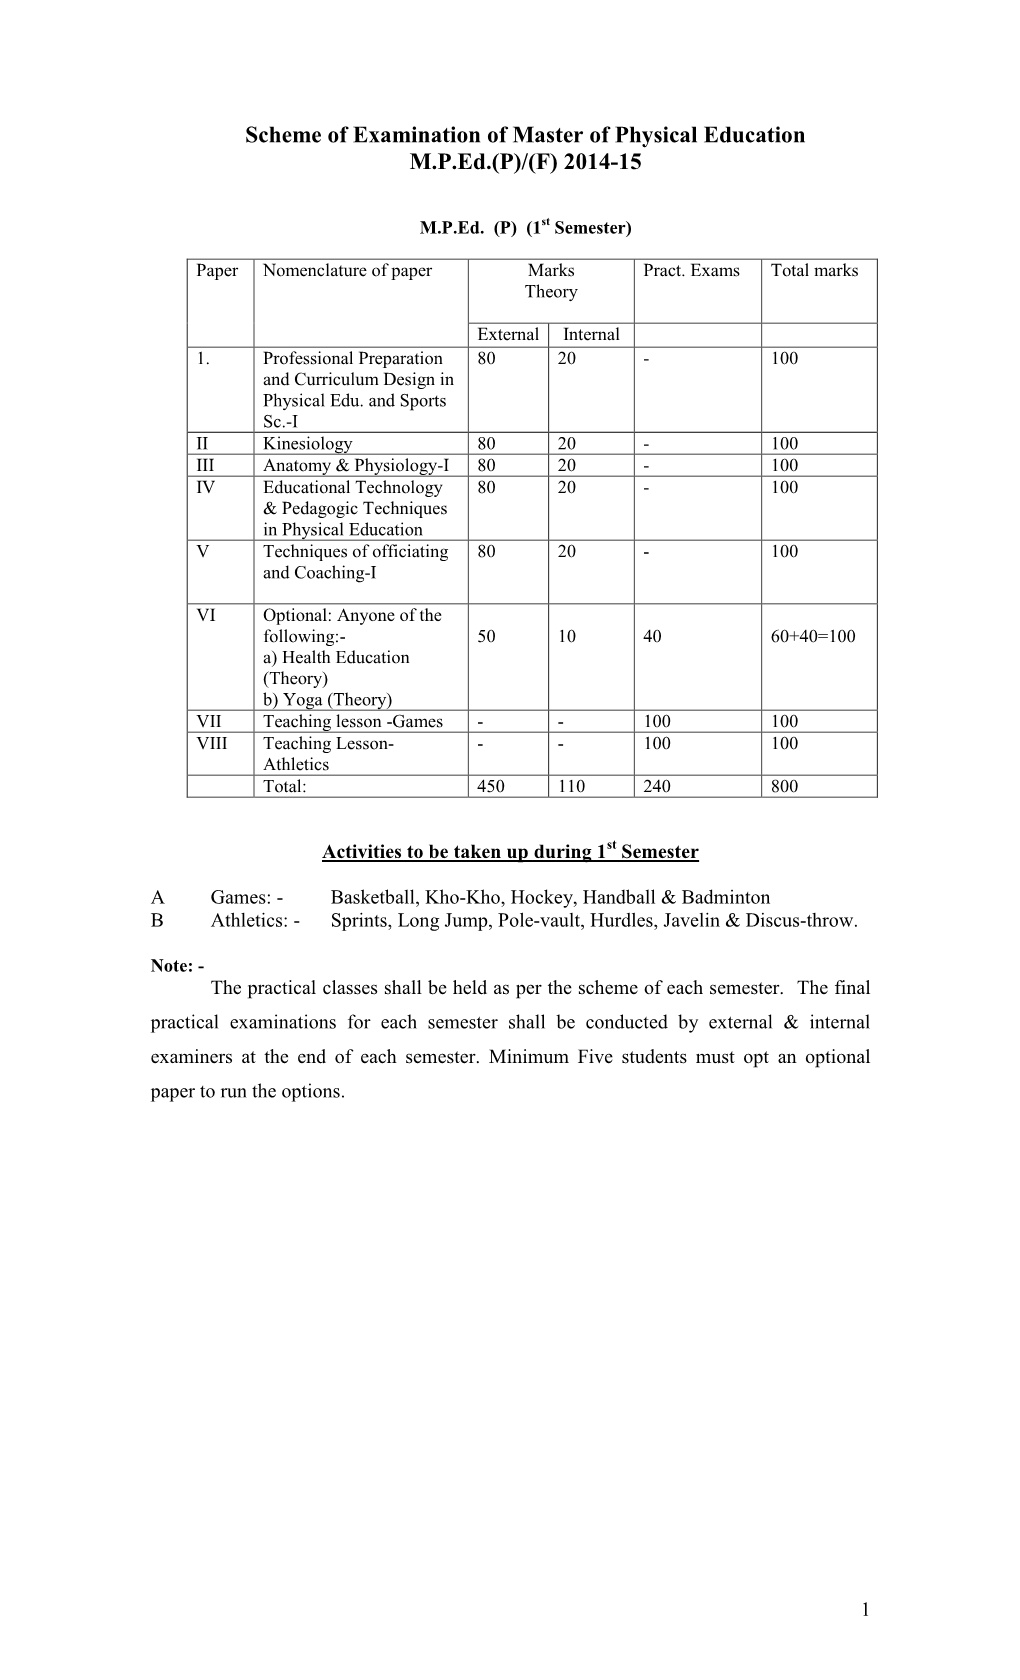 Scheme of Examination of Master of Physical Education M.P.Ed.(P)/(F) 2014-15